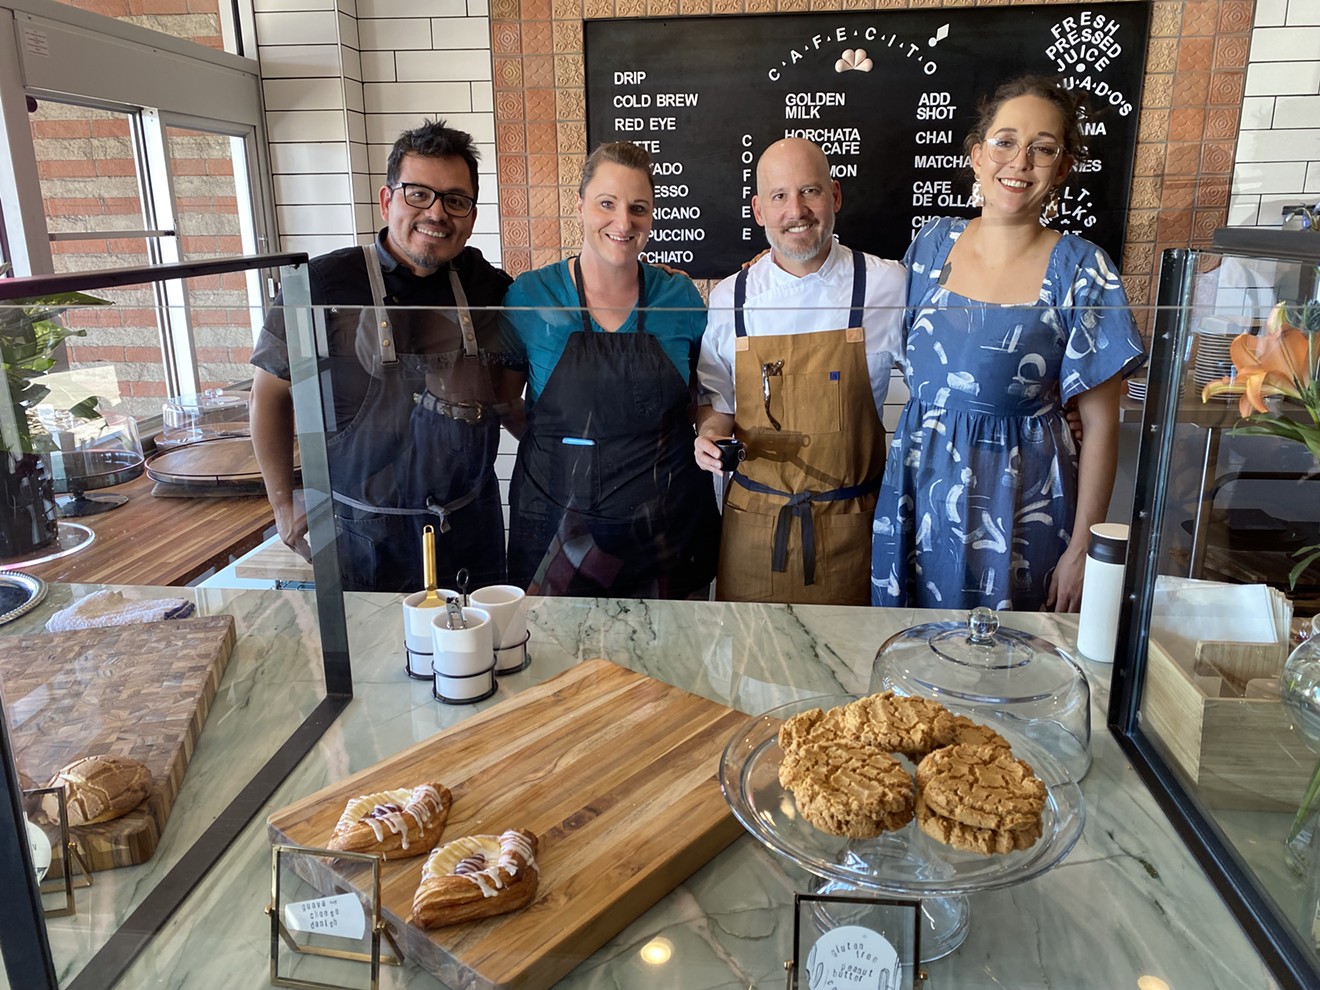 Otro Cafecito staff includes partner Carlos Diaz, pastry chef Amanda Hepler, chef and owner Doug Robson, and director of operations Ashli Galbreath.